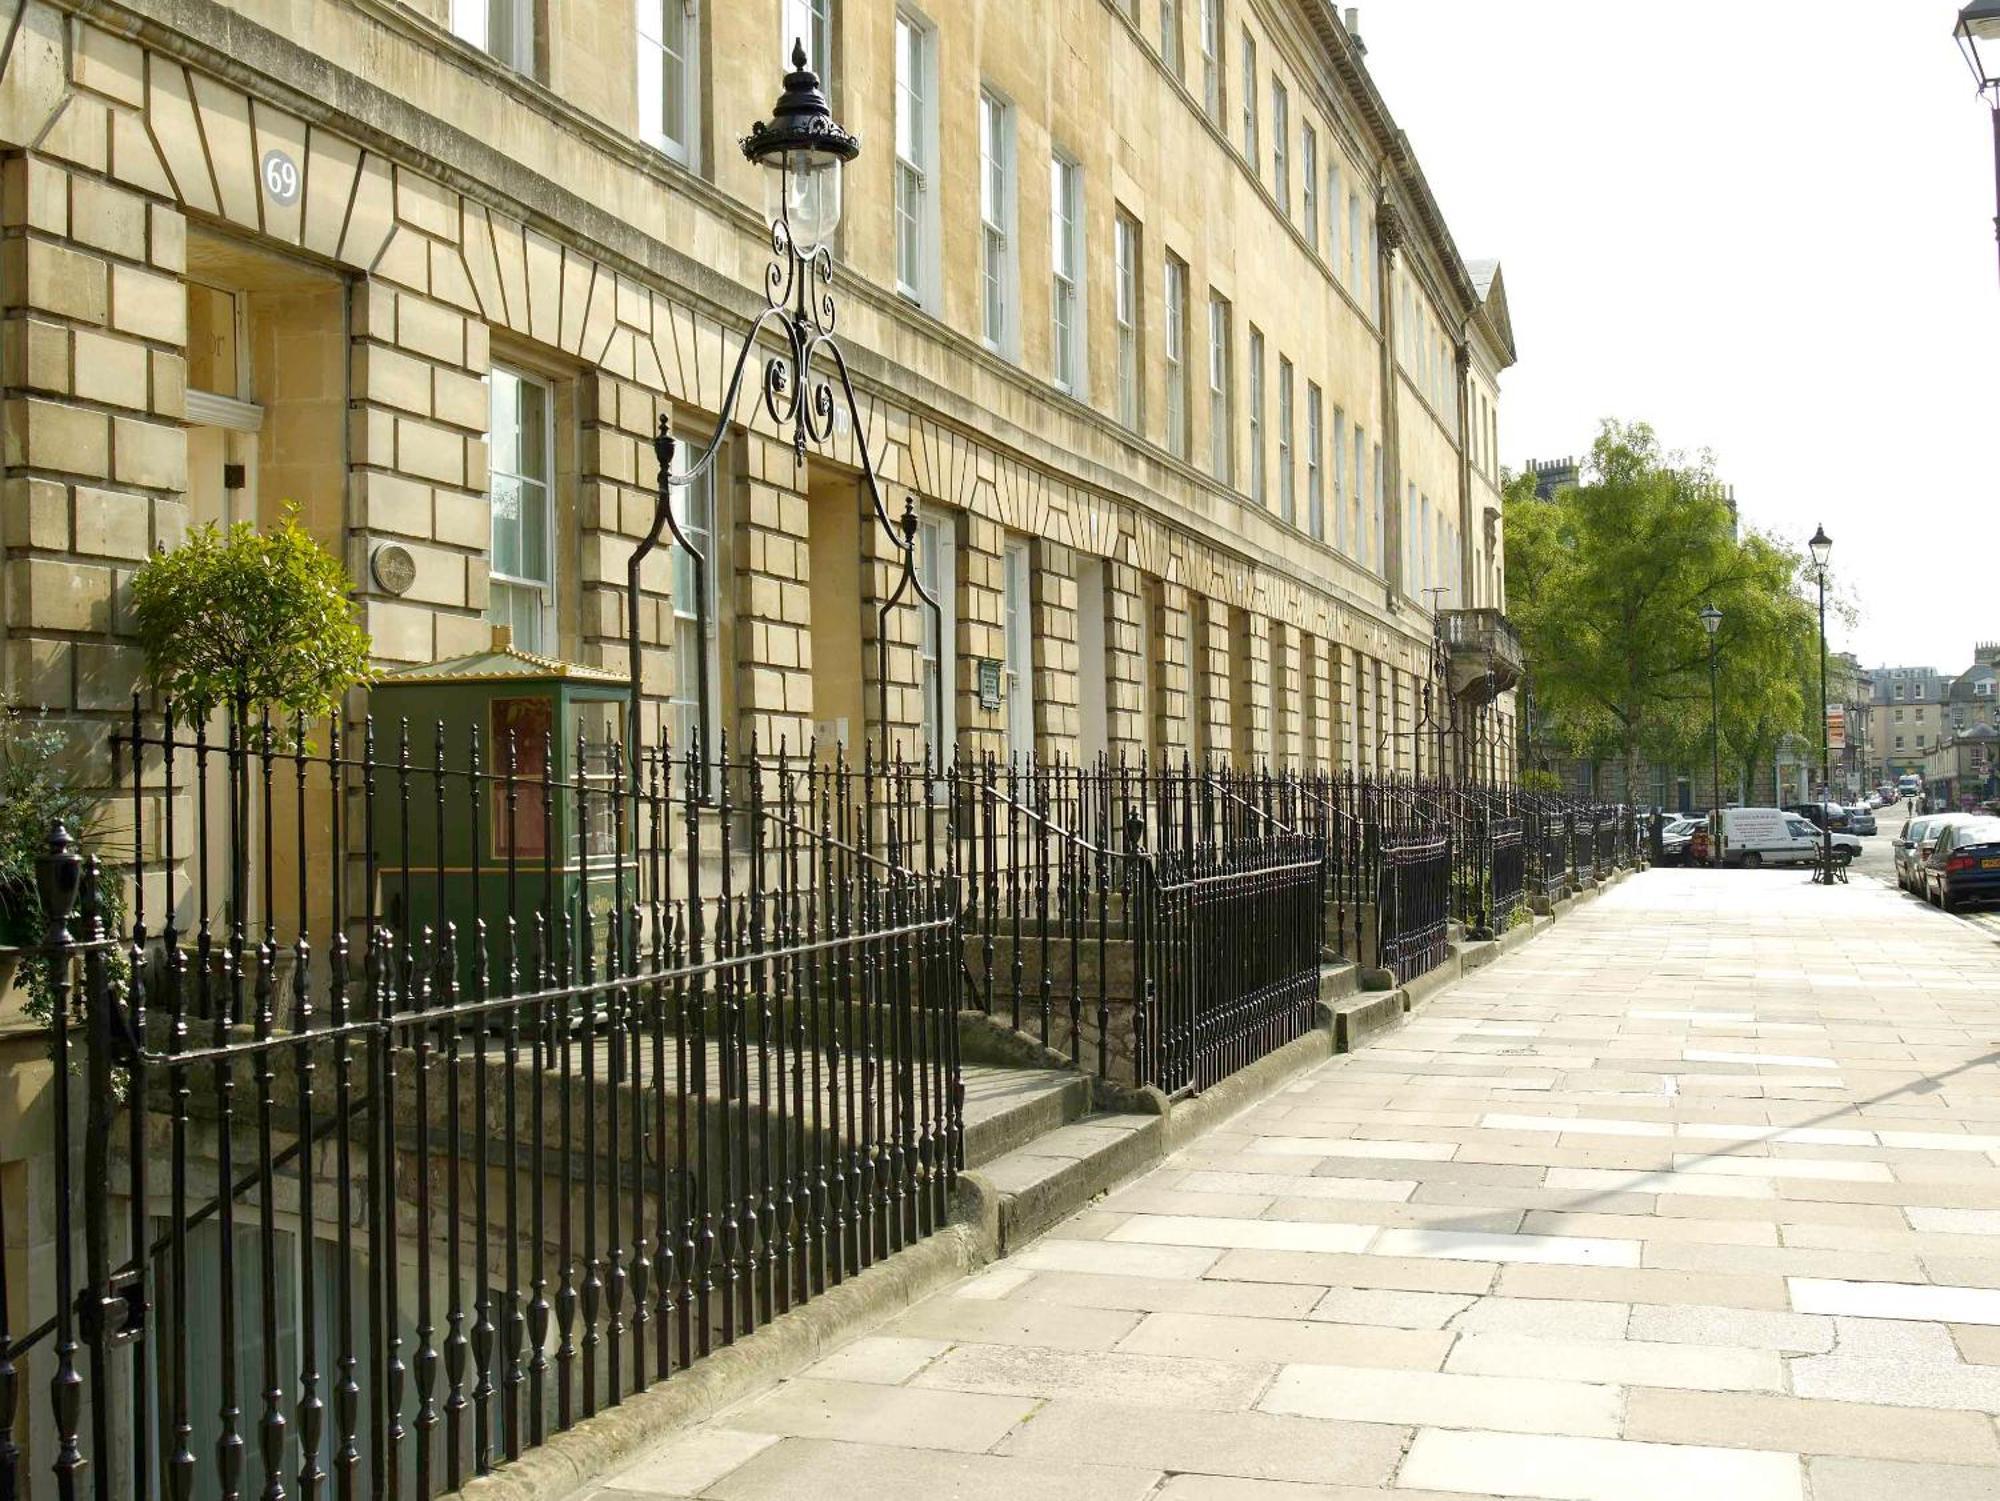 The Windsor Town House Hotel Bath Exterior foto